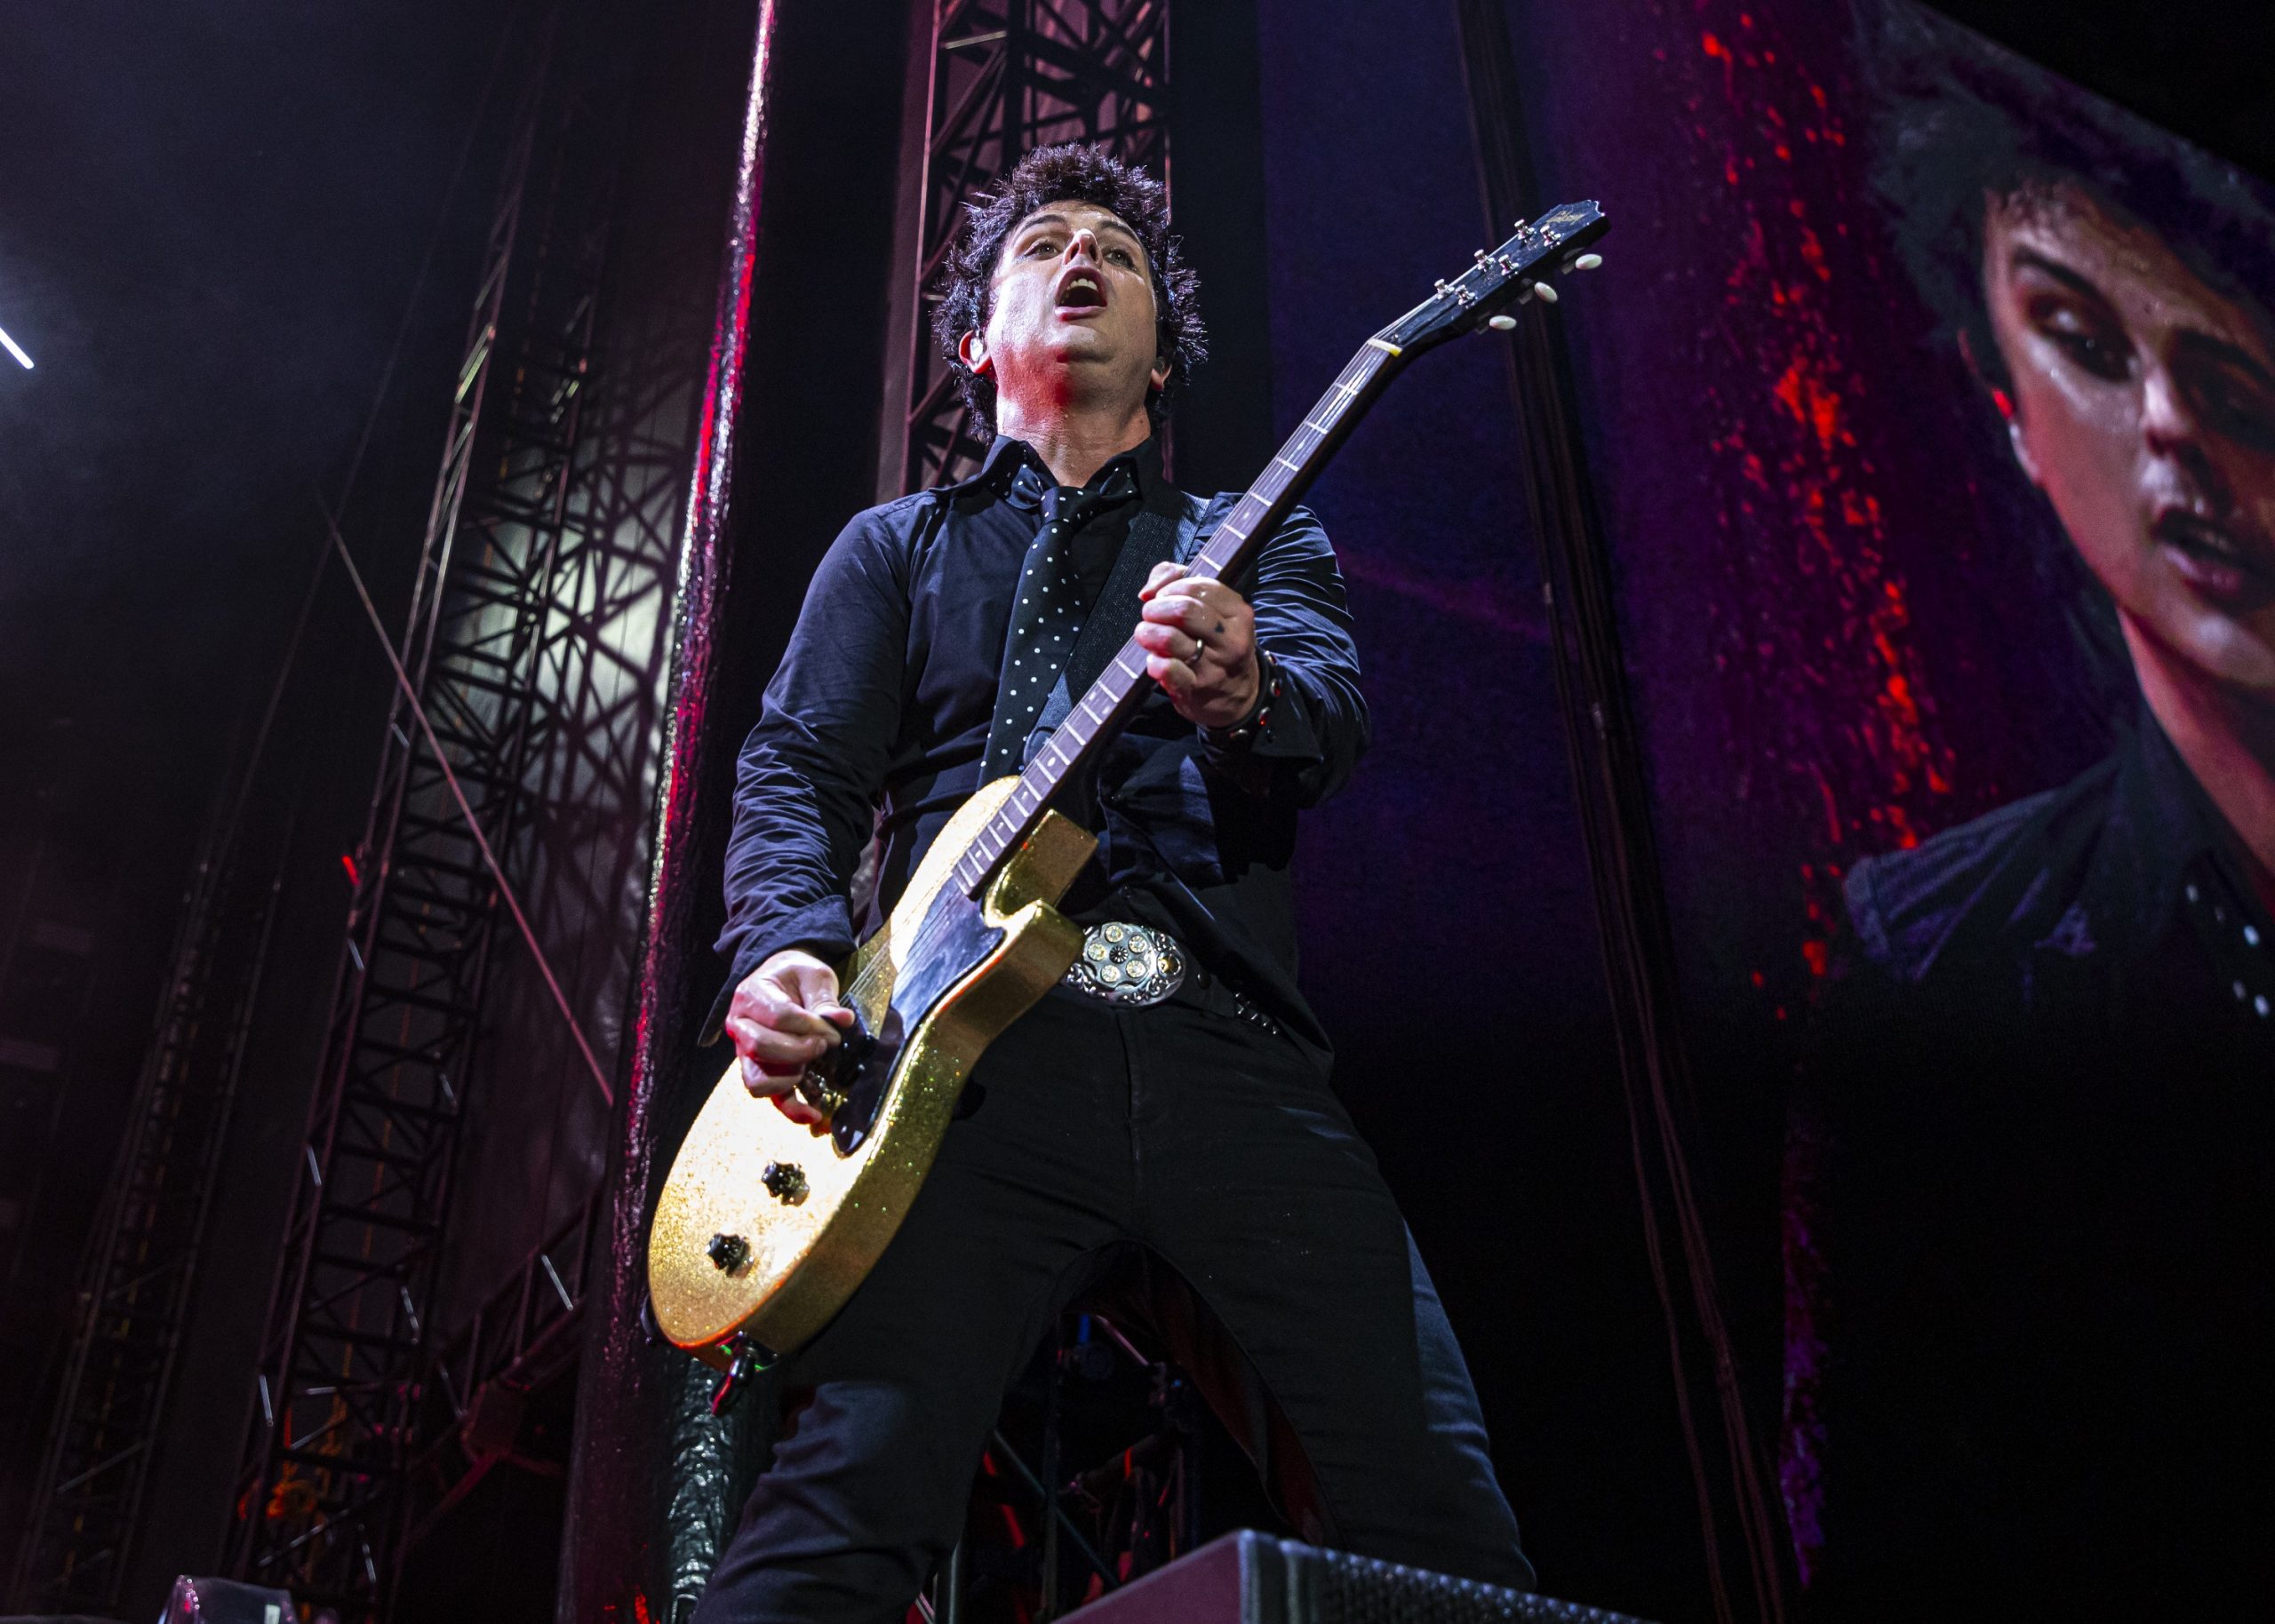 Green Day's Billie Joe Armstrong, owner of a now-stolen 1962 Chevy Nova, on stage last summer